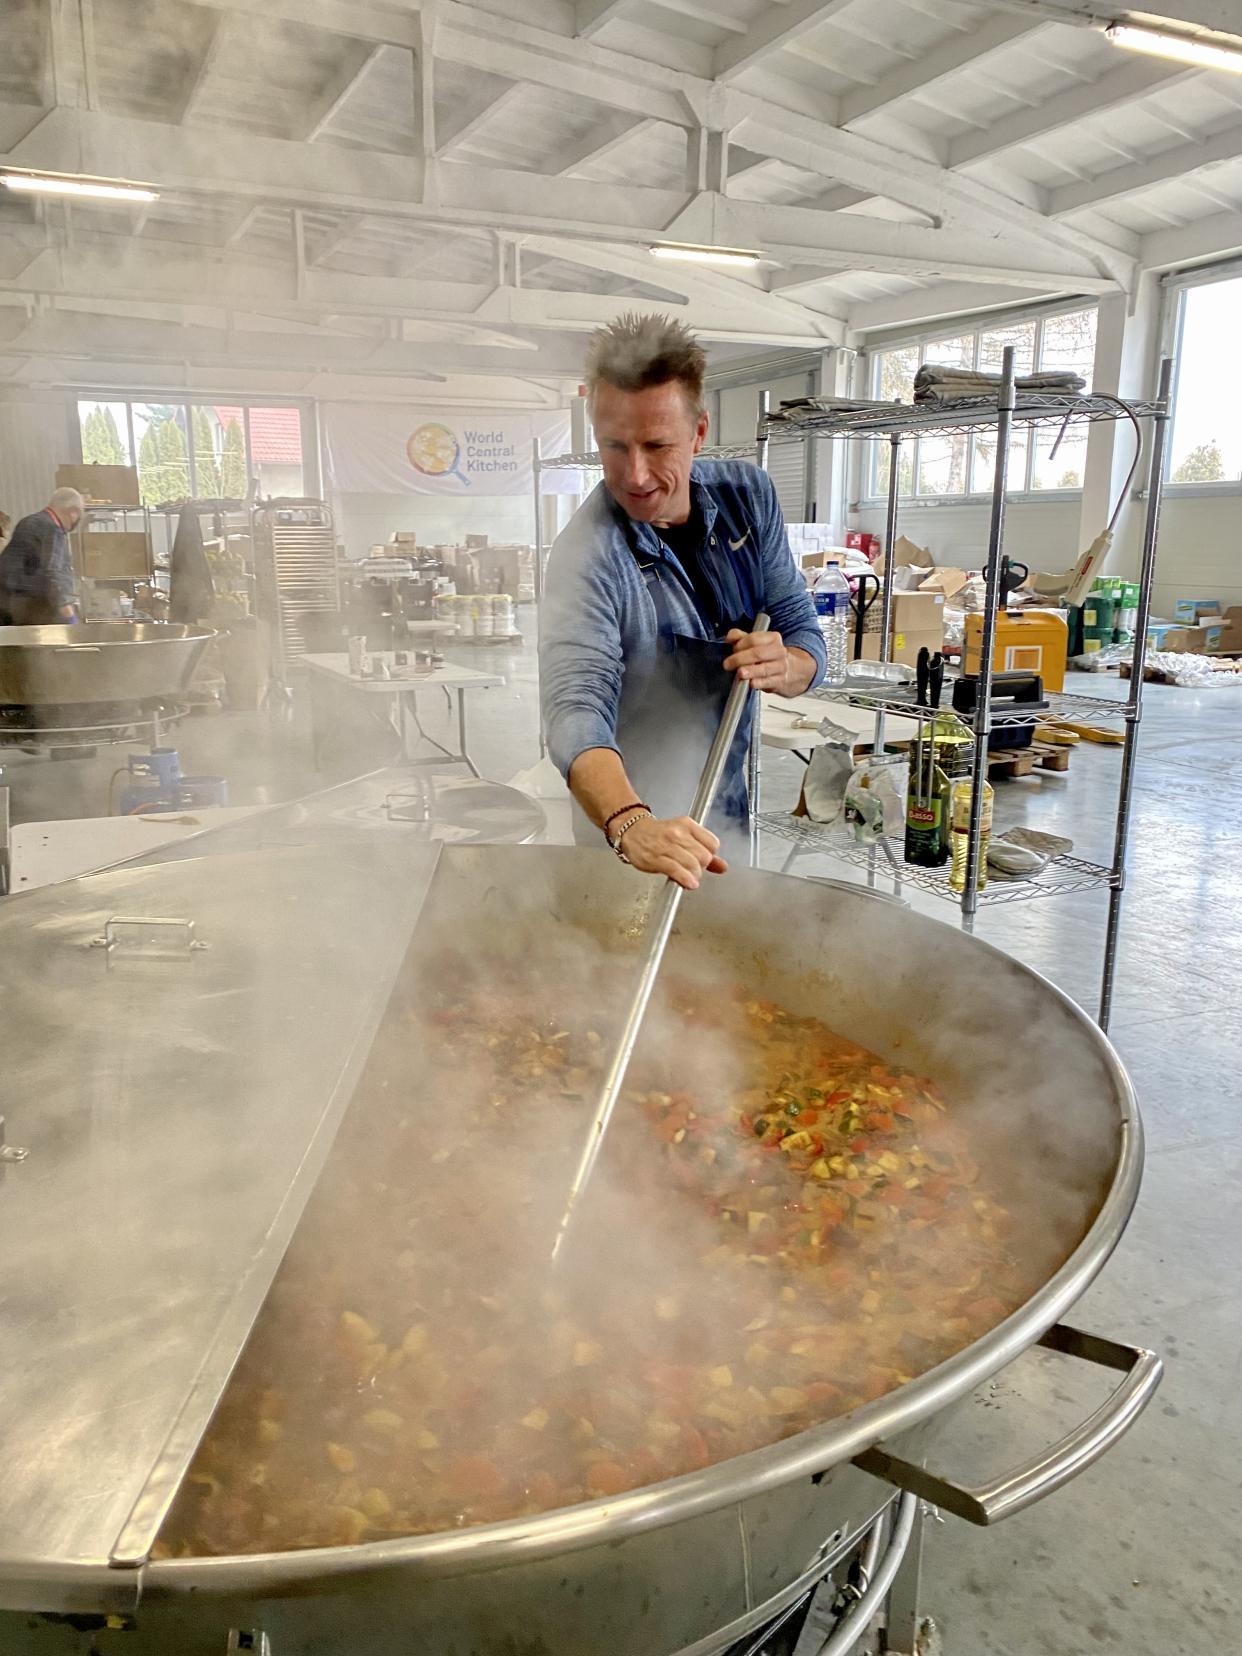 "We're hopefully giving people a little bit of dignity," says Murphy of his work cooking for Ukrainian refugees in Poland, "a warm bowl of food and something that is warming their heart and their soul." (Photo: Marc Murphy)